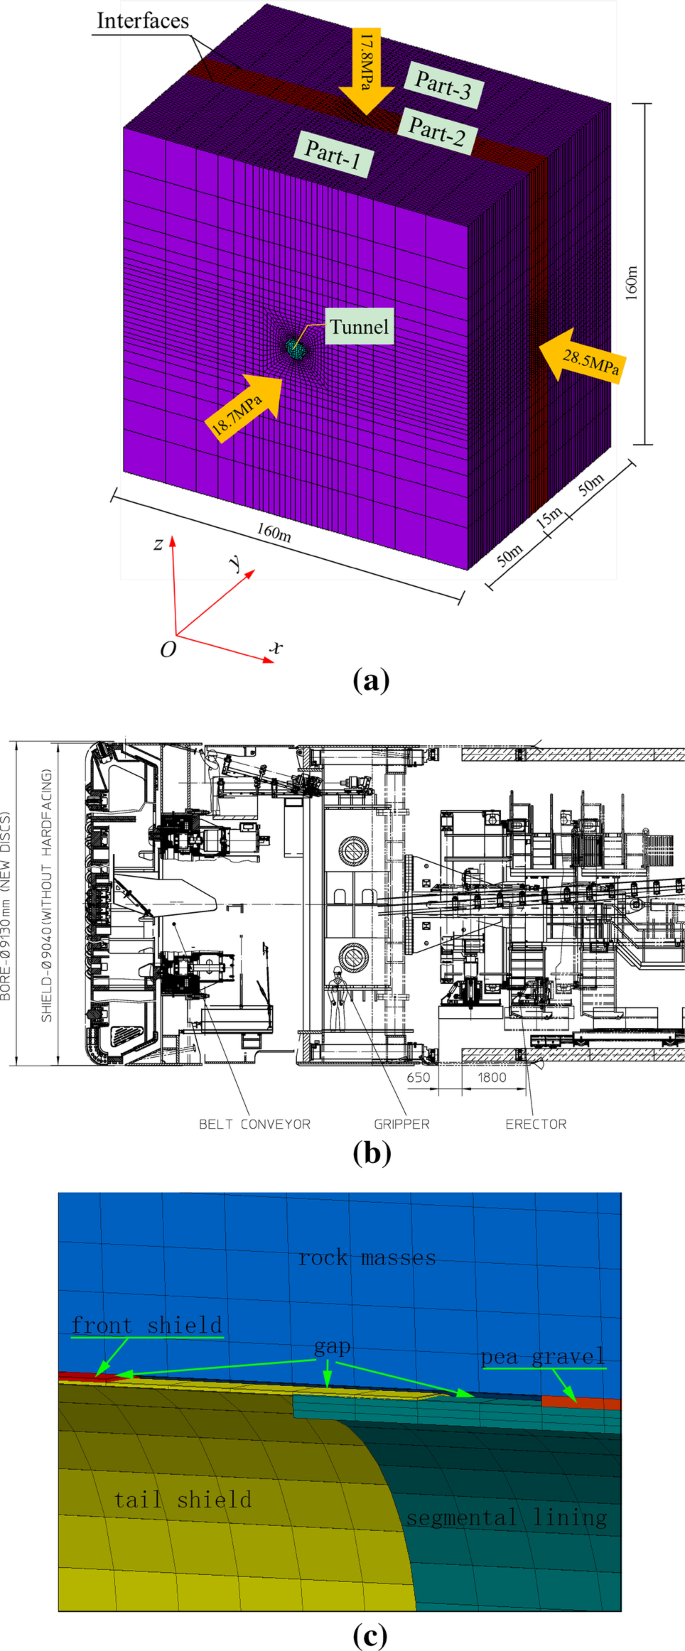 An Improved 3d Finite Difference Model For Simulation Of Double Shield Tbm Tunnelling In Heavily Jointed Rock Masses The Dxl Tunnel Case Springerlink